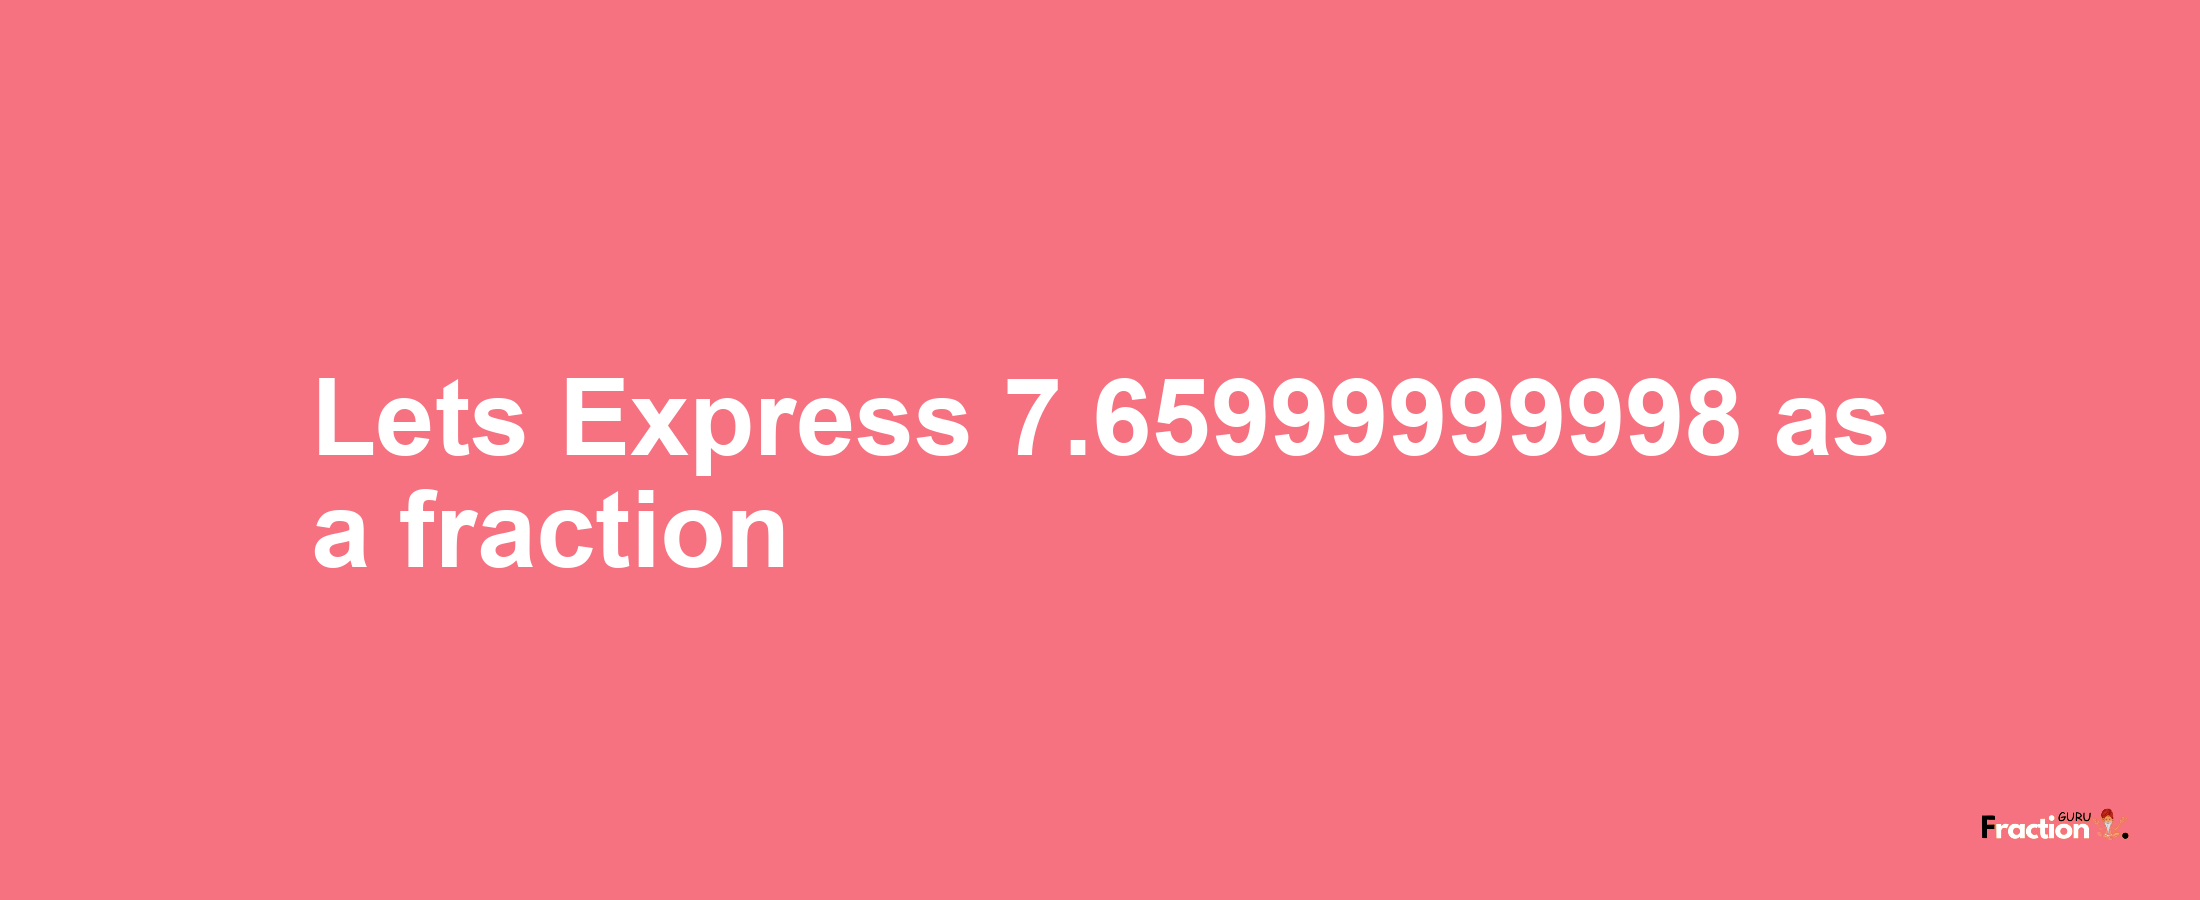 Lets Express 7.65999999998 as afraction